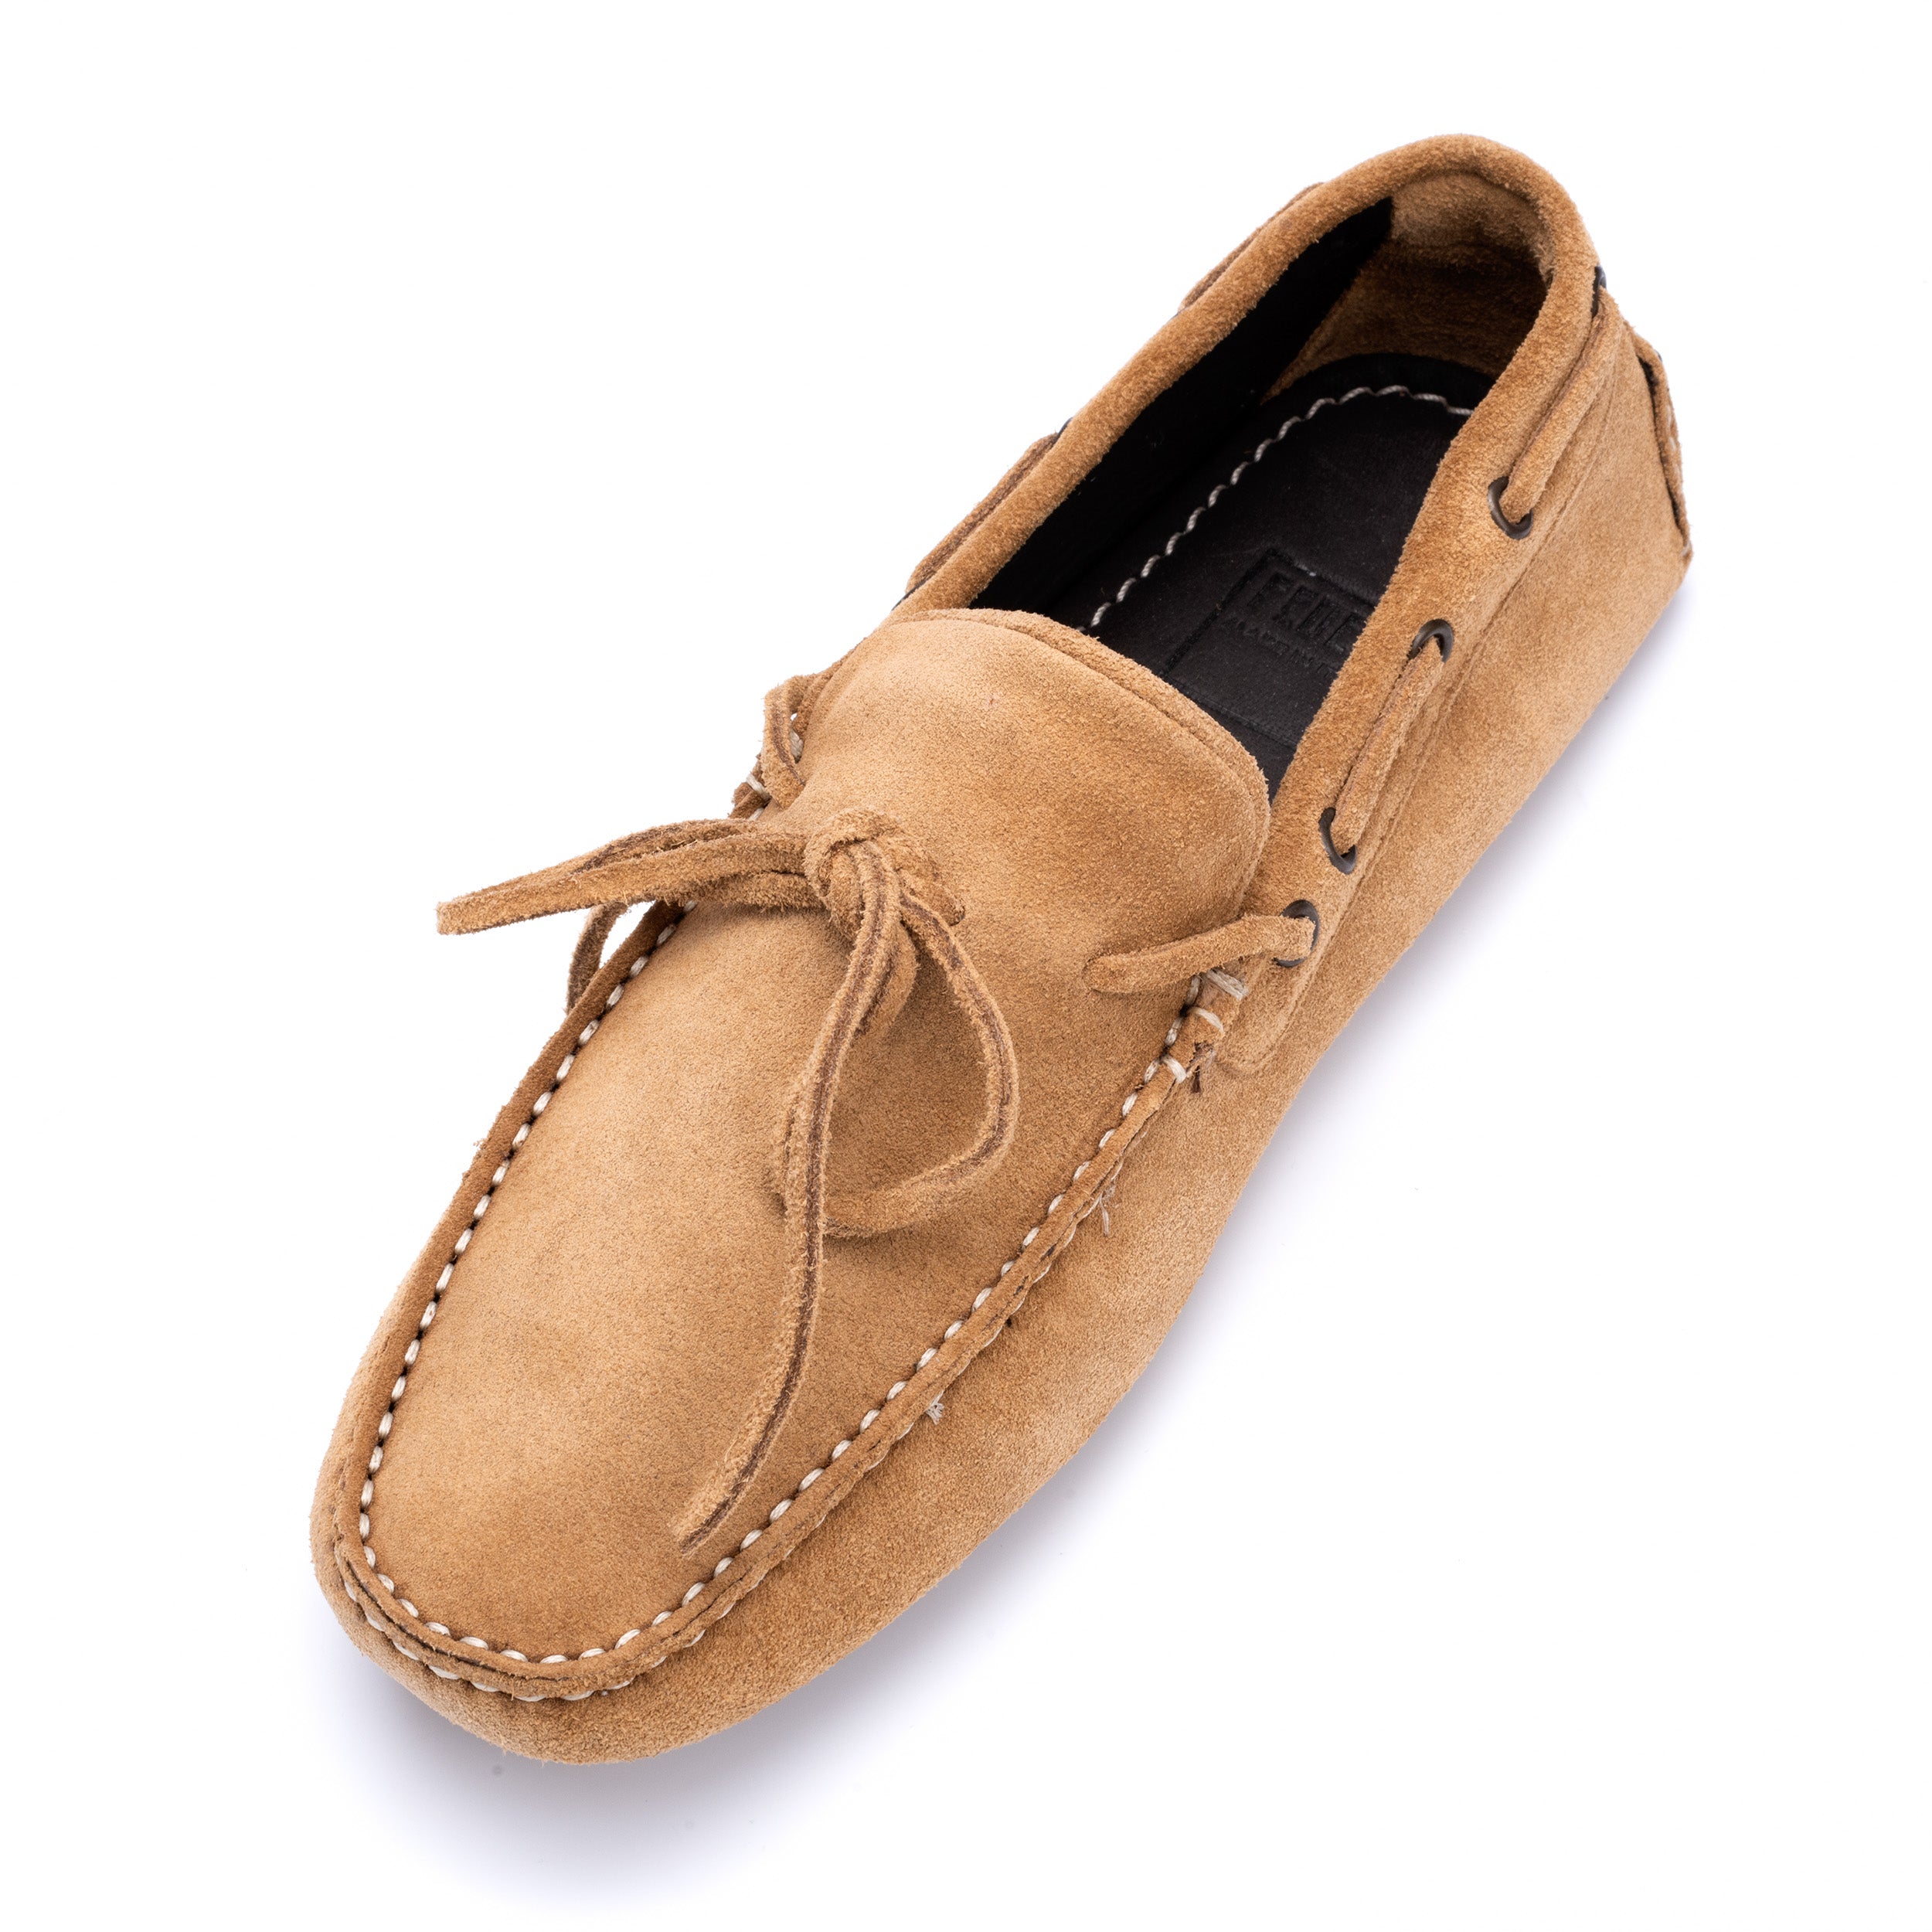 FEDELI "Rally" Camel Brown Suede Loafers Driving Car Shoes Moccasins 40.5 NEW 7. FEDELI